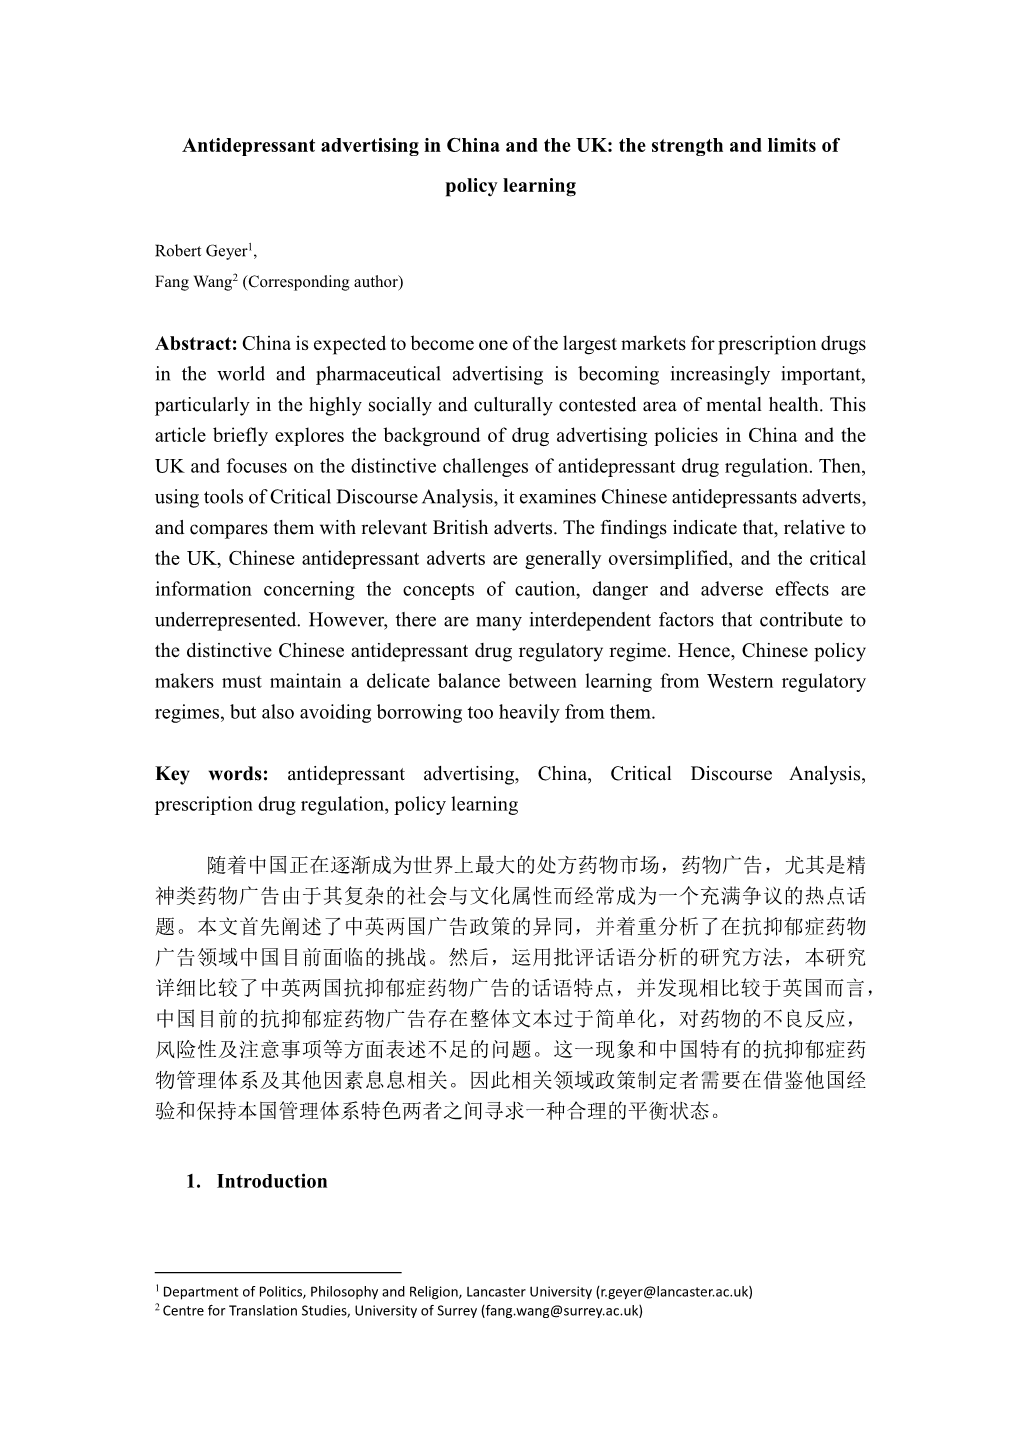 Antidepressant Advertising in China and the UK: the Strength and Limits of Policy Learning